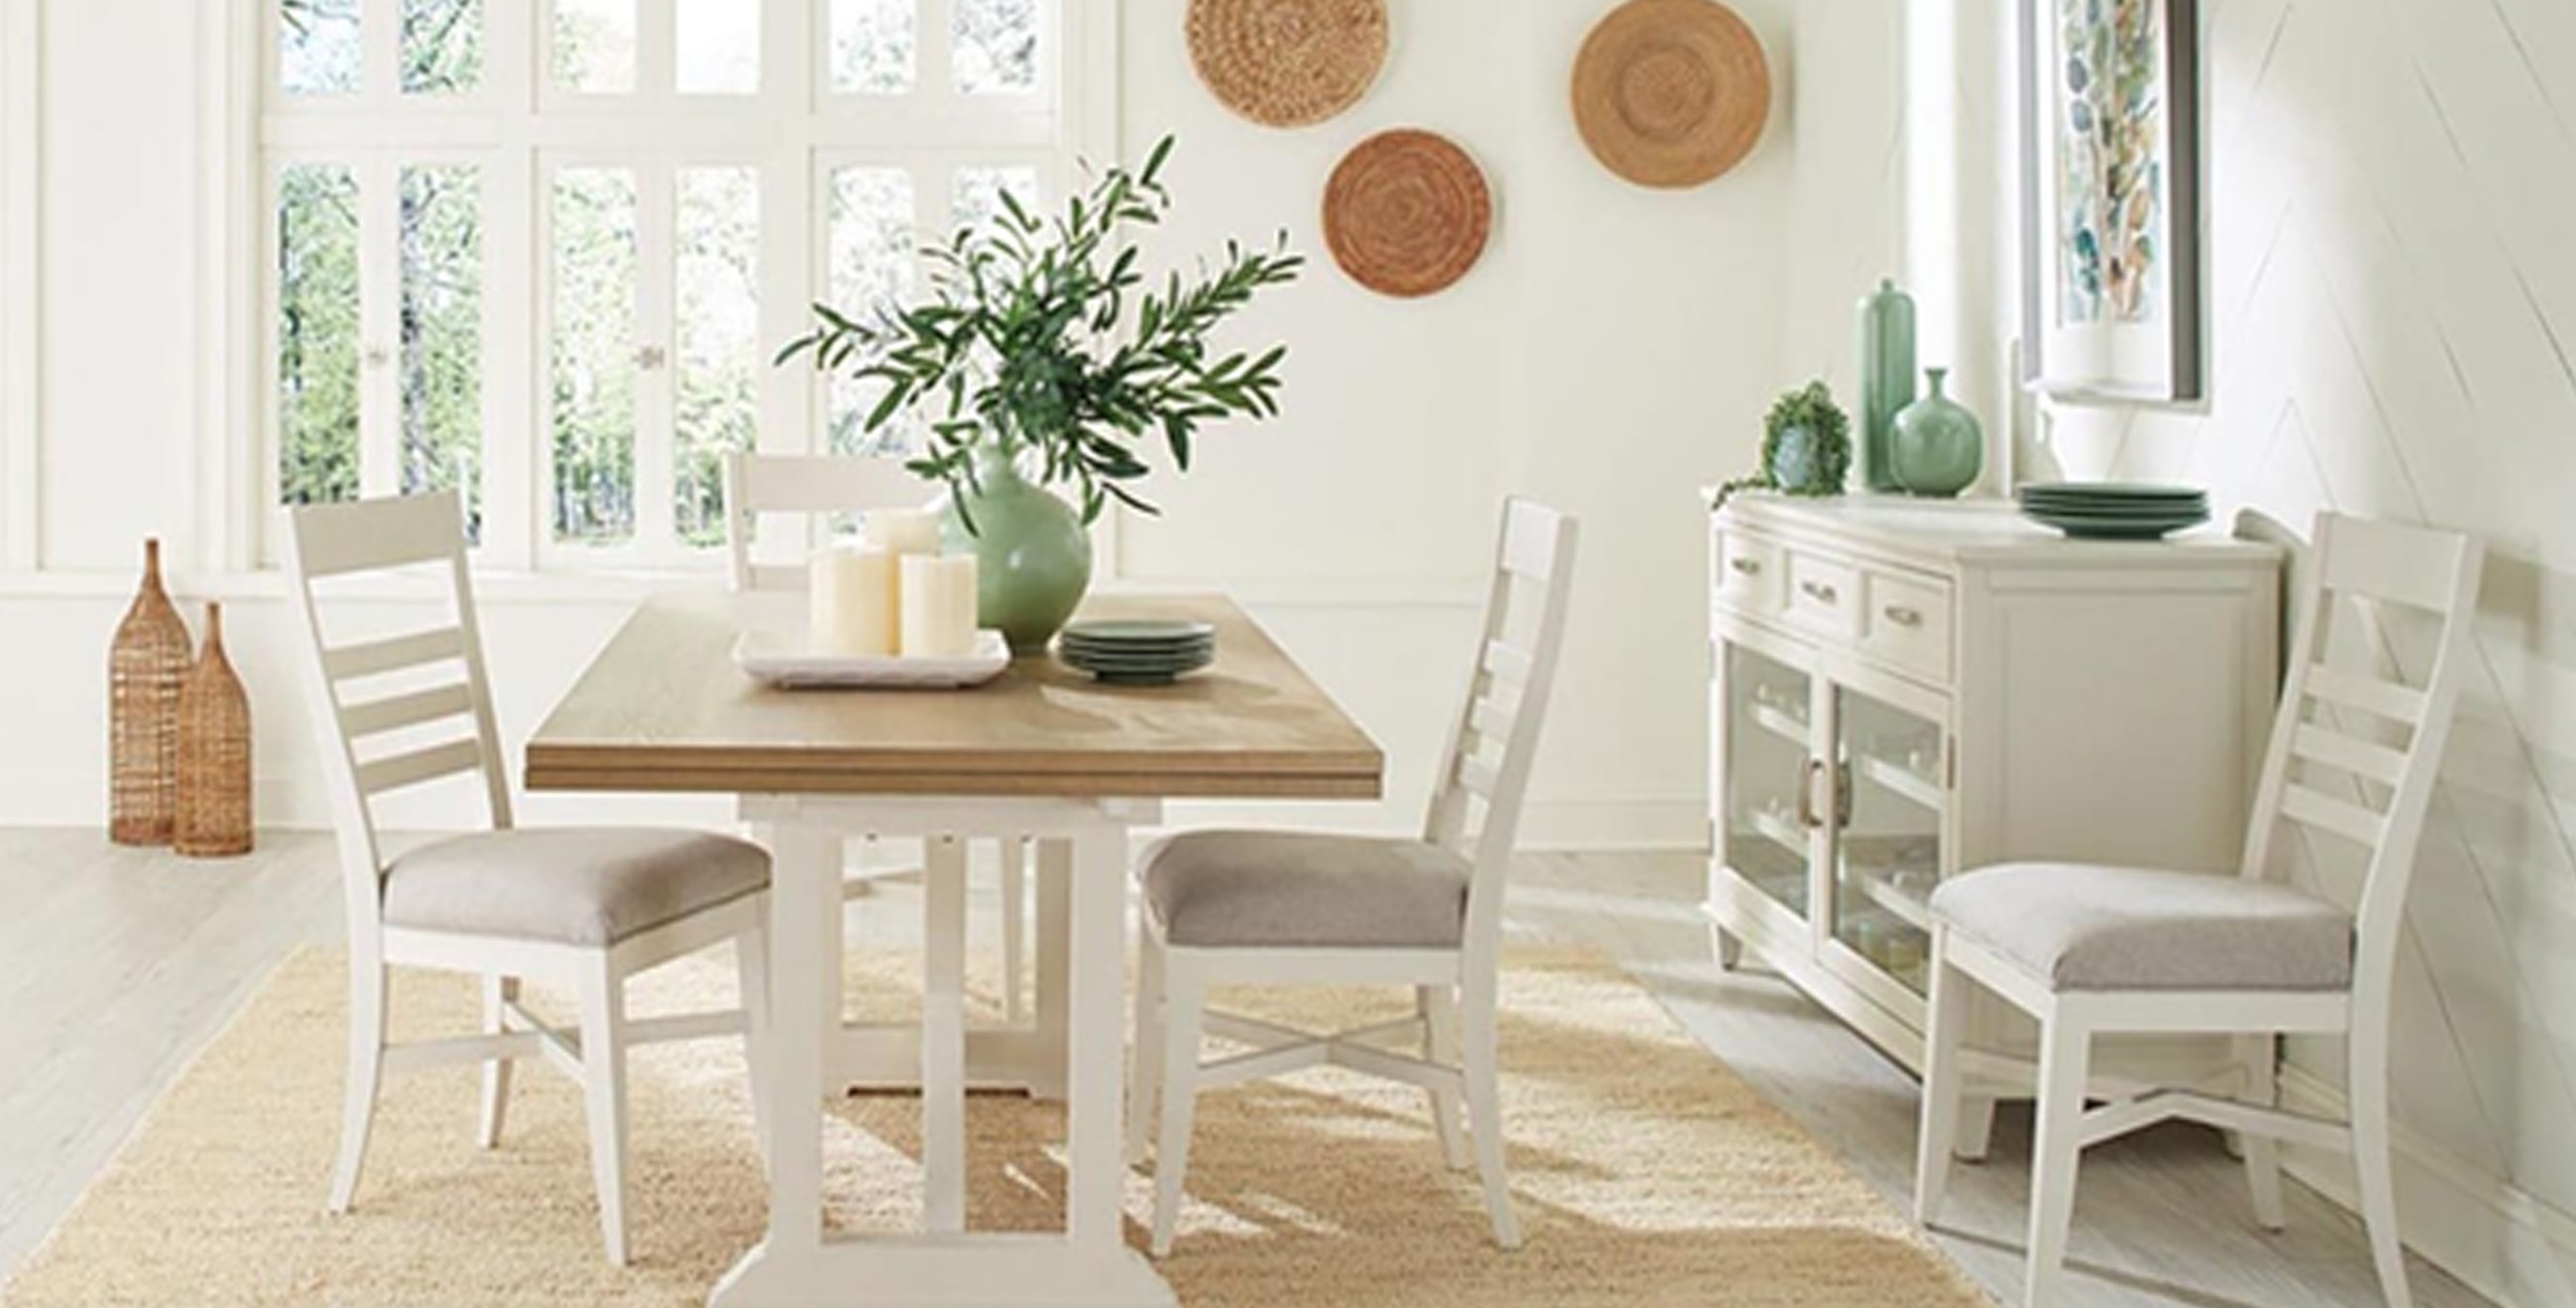 How to Decorate Your Dining Room Table